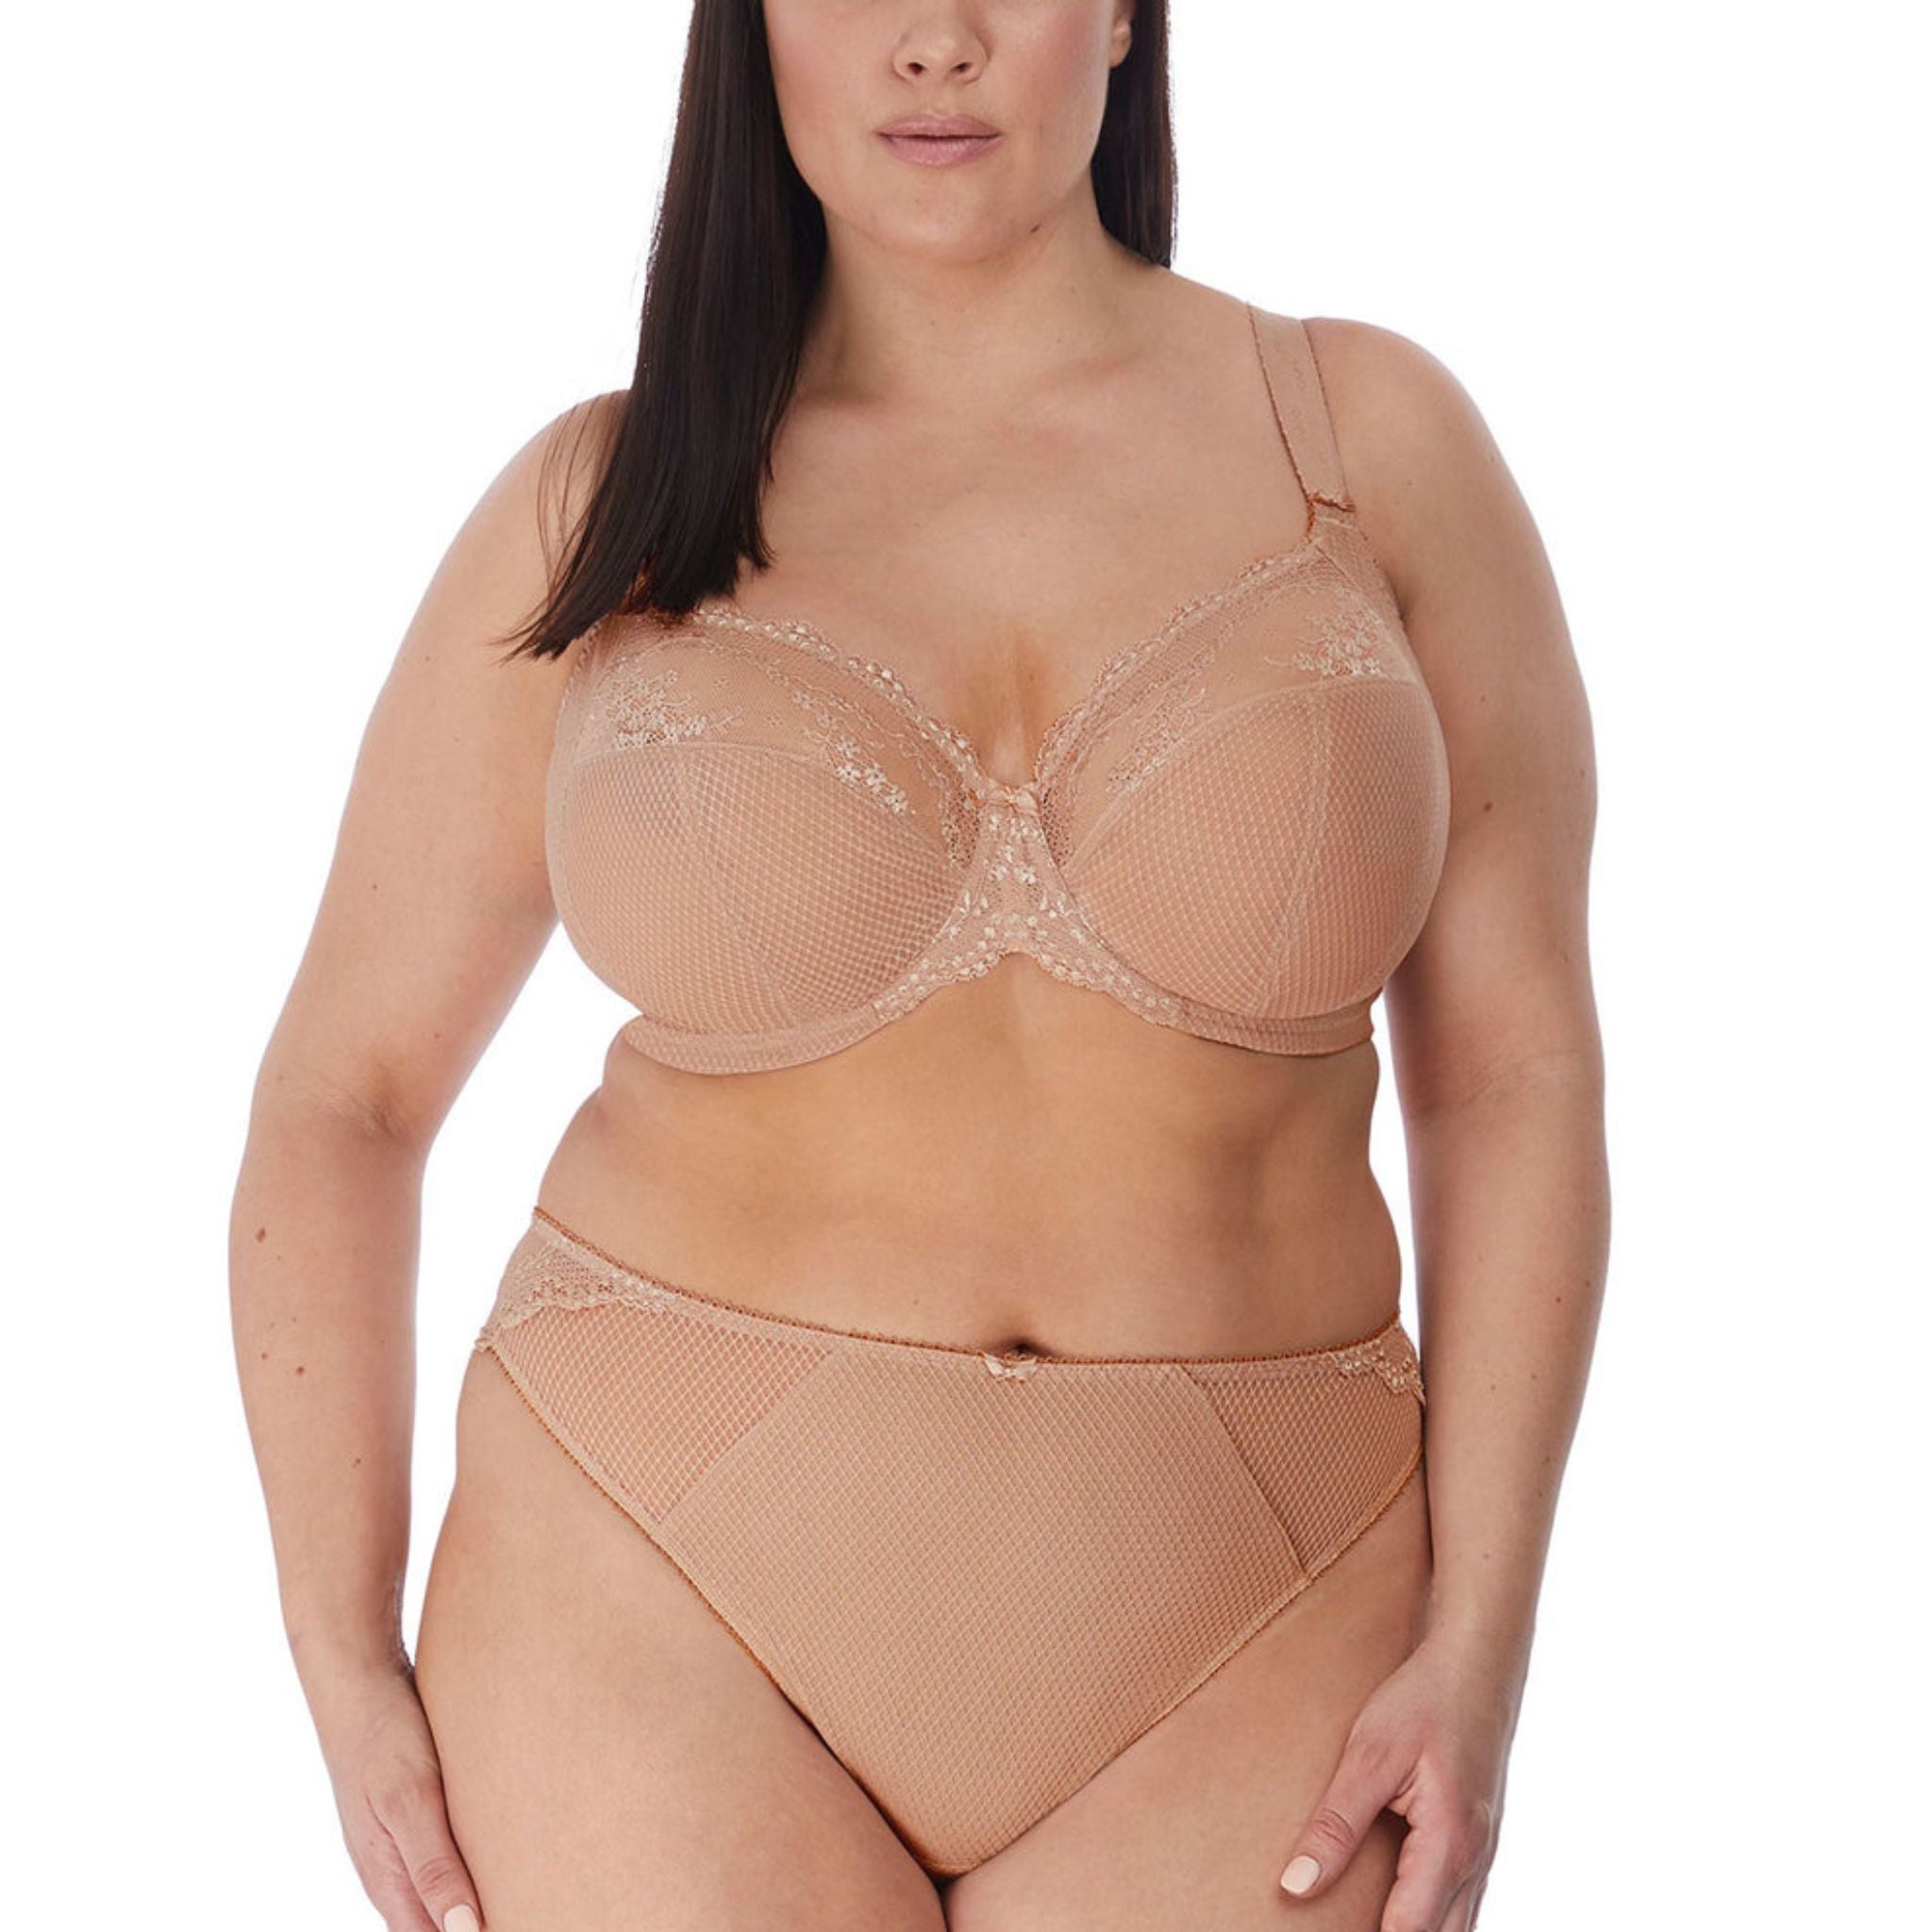 A lingerie drawer essential, discover the Charley Plunge Bra in an everyday Fawn colourway. The three sectioned cups plus side support offers perfect shape and uplift, while a low cut neckline creates plunge without push up. An adjustable J-hook enables the back strap to be converted to a racerback style.